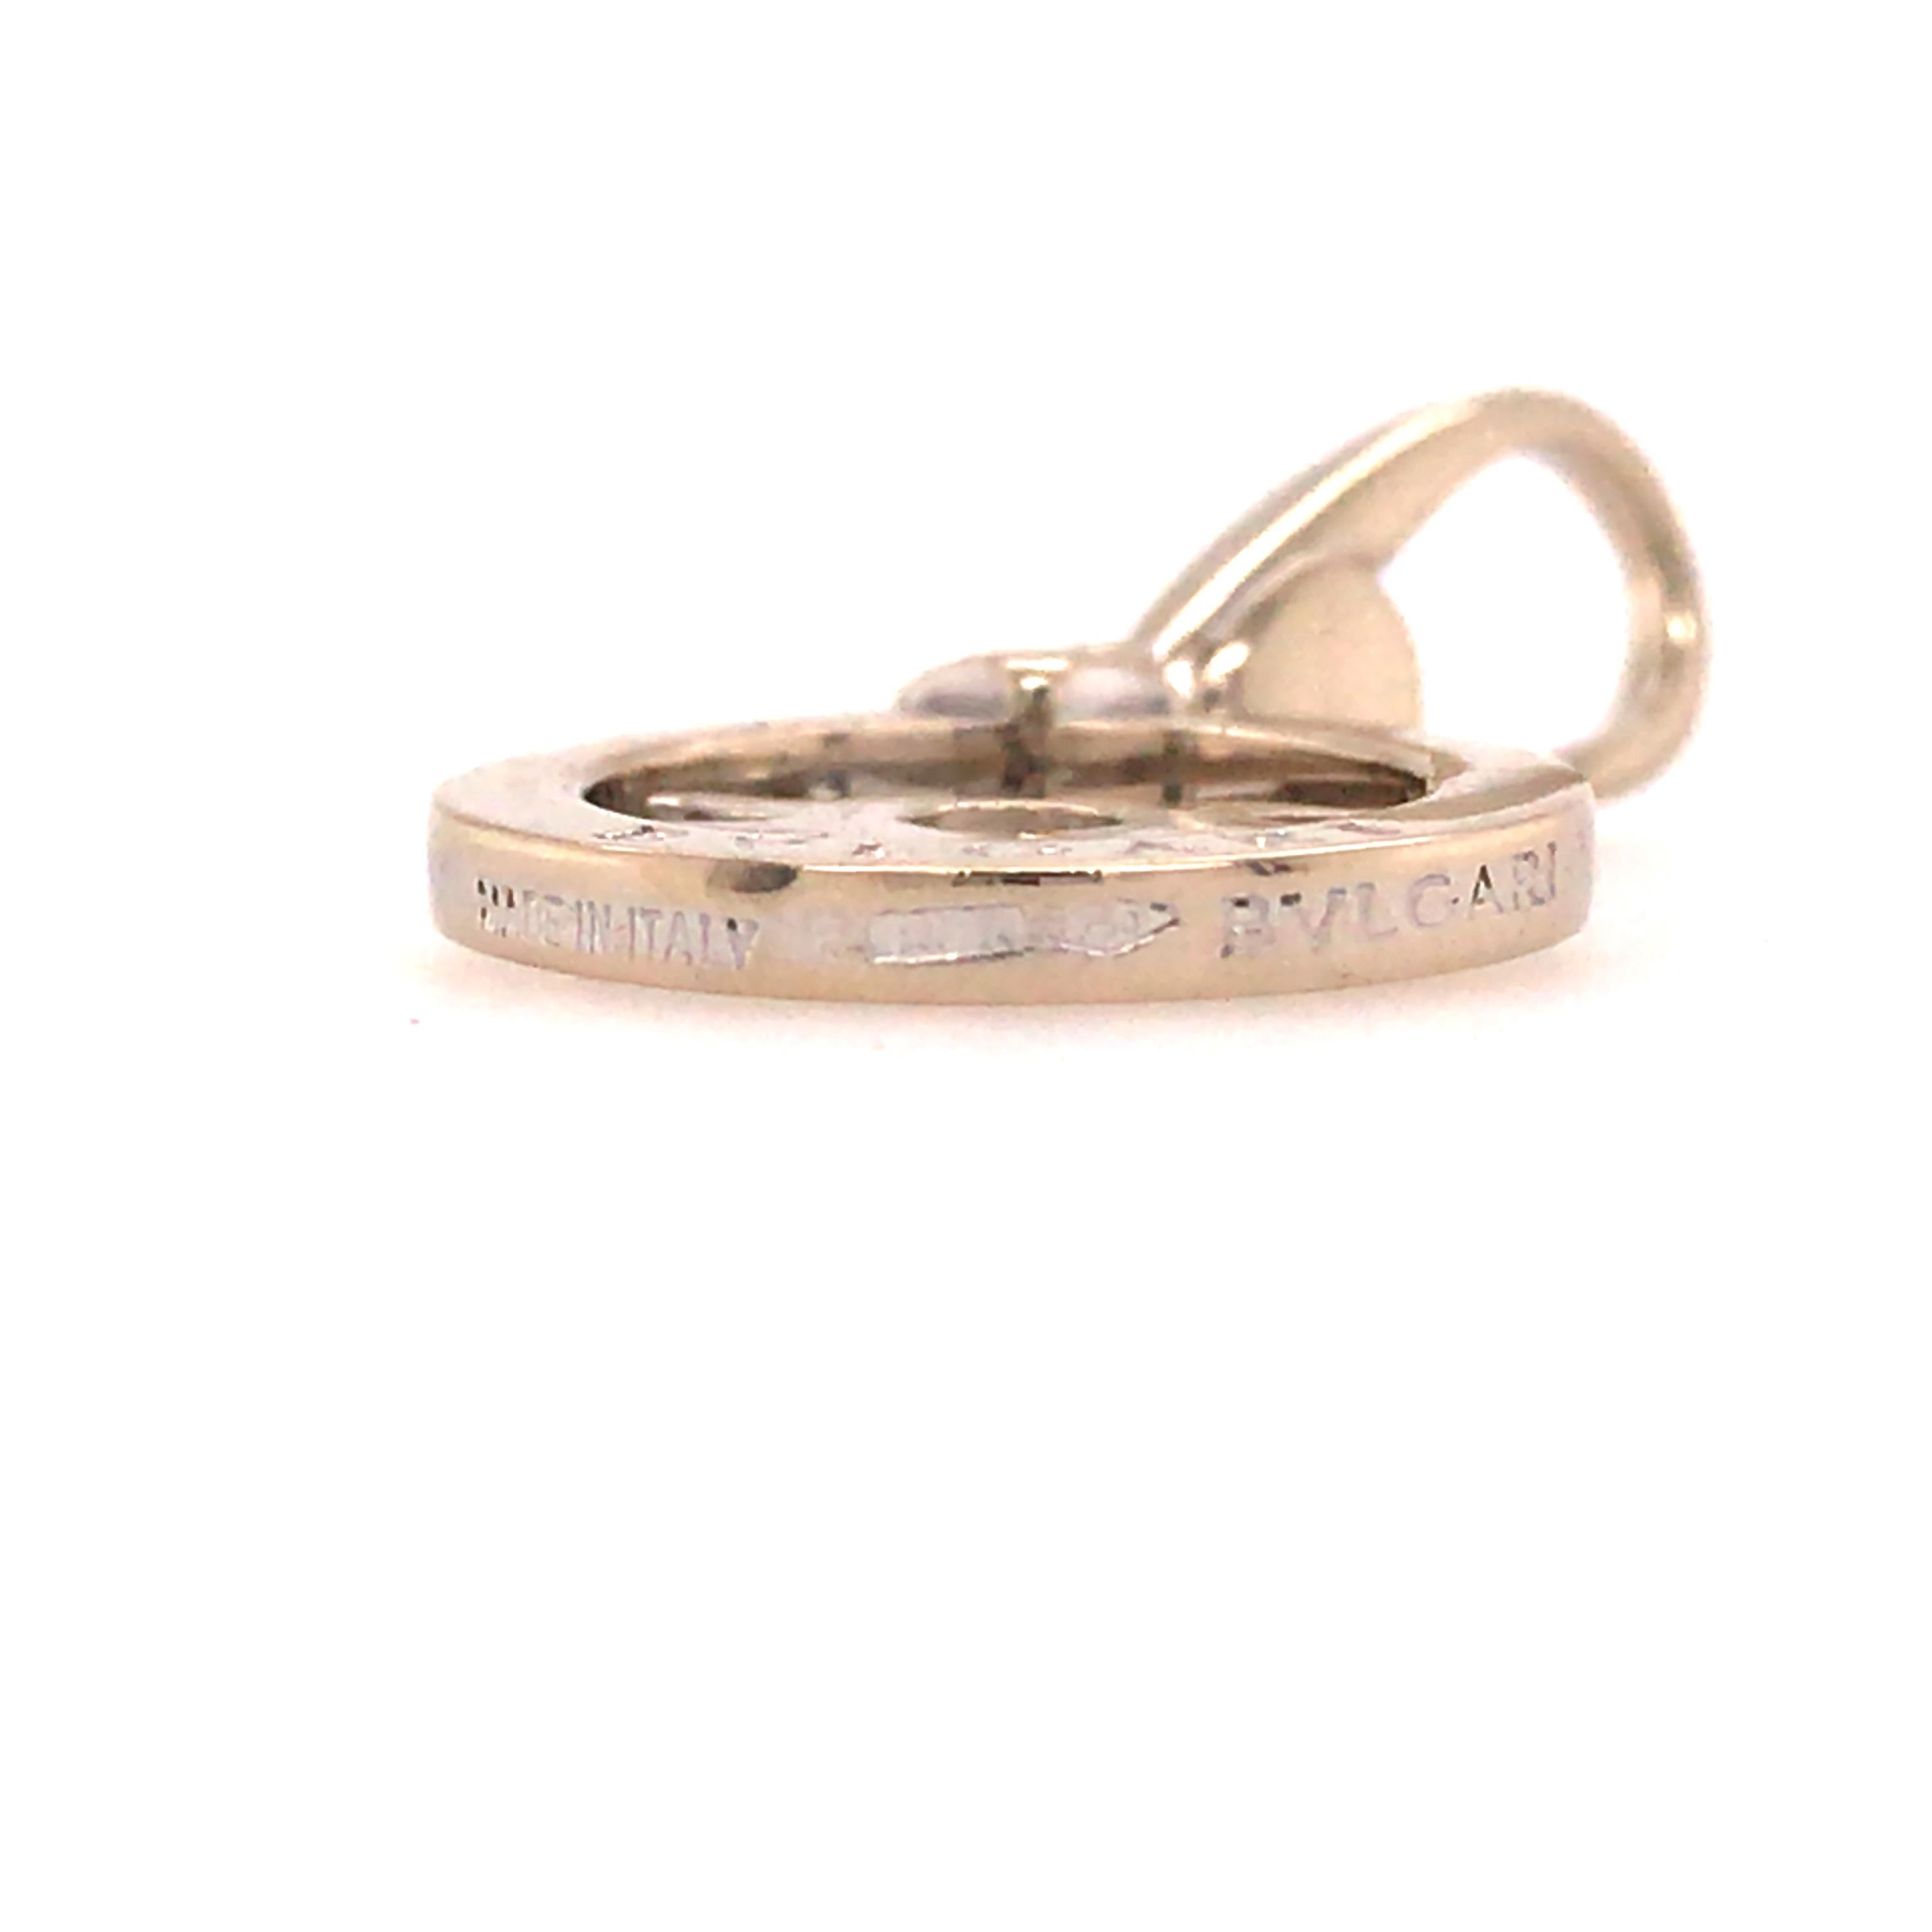 BVLGARI Charm in 18K Two-Tone Gold.  The Charm measures 1 1/4 inch in length and 5/8 inch in width.  3.26 grams. Stamped 